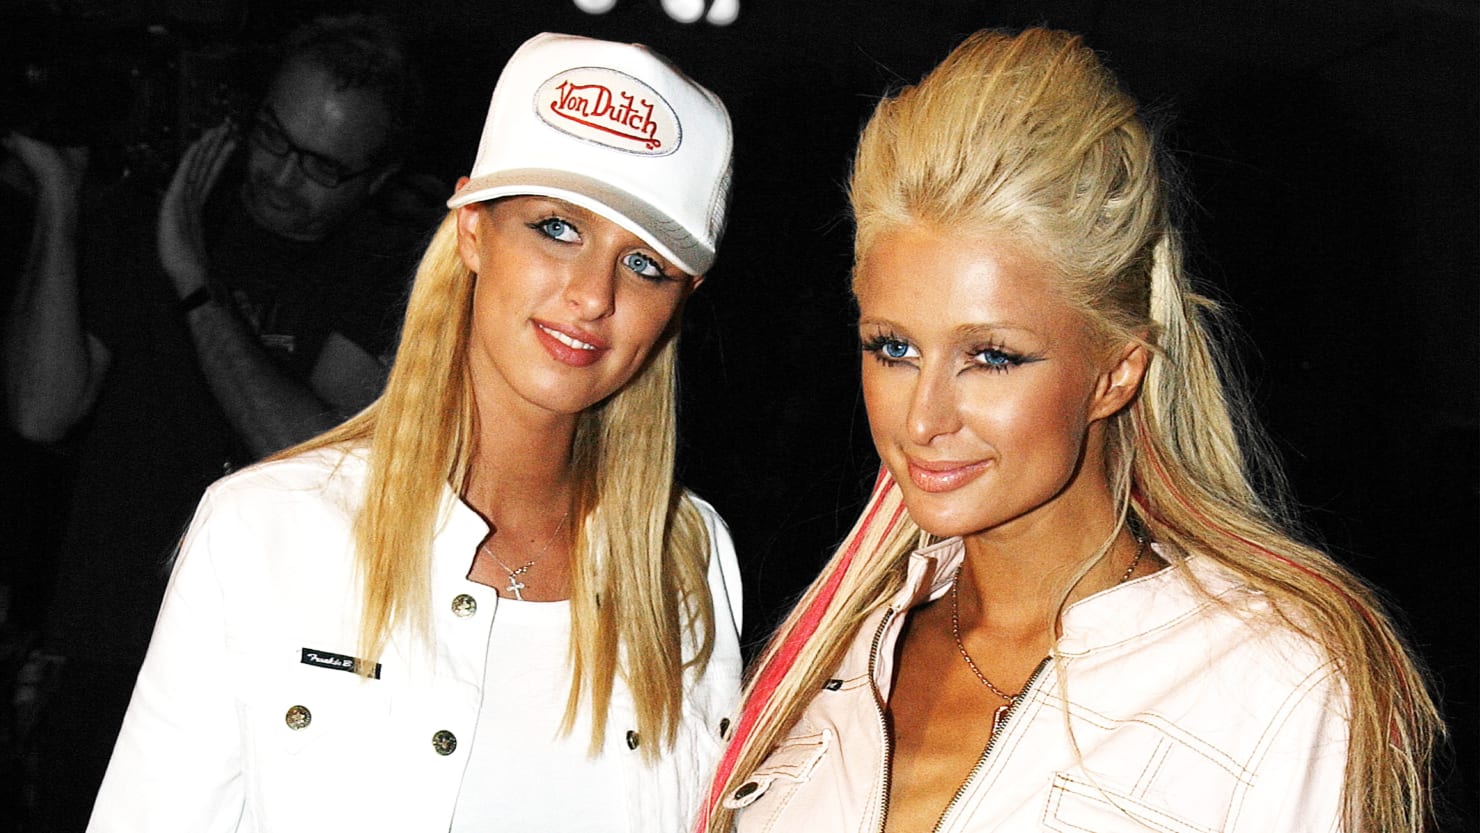 The Great Fail: Von Dutch, From Price Tags to Tie Tags